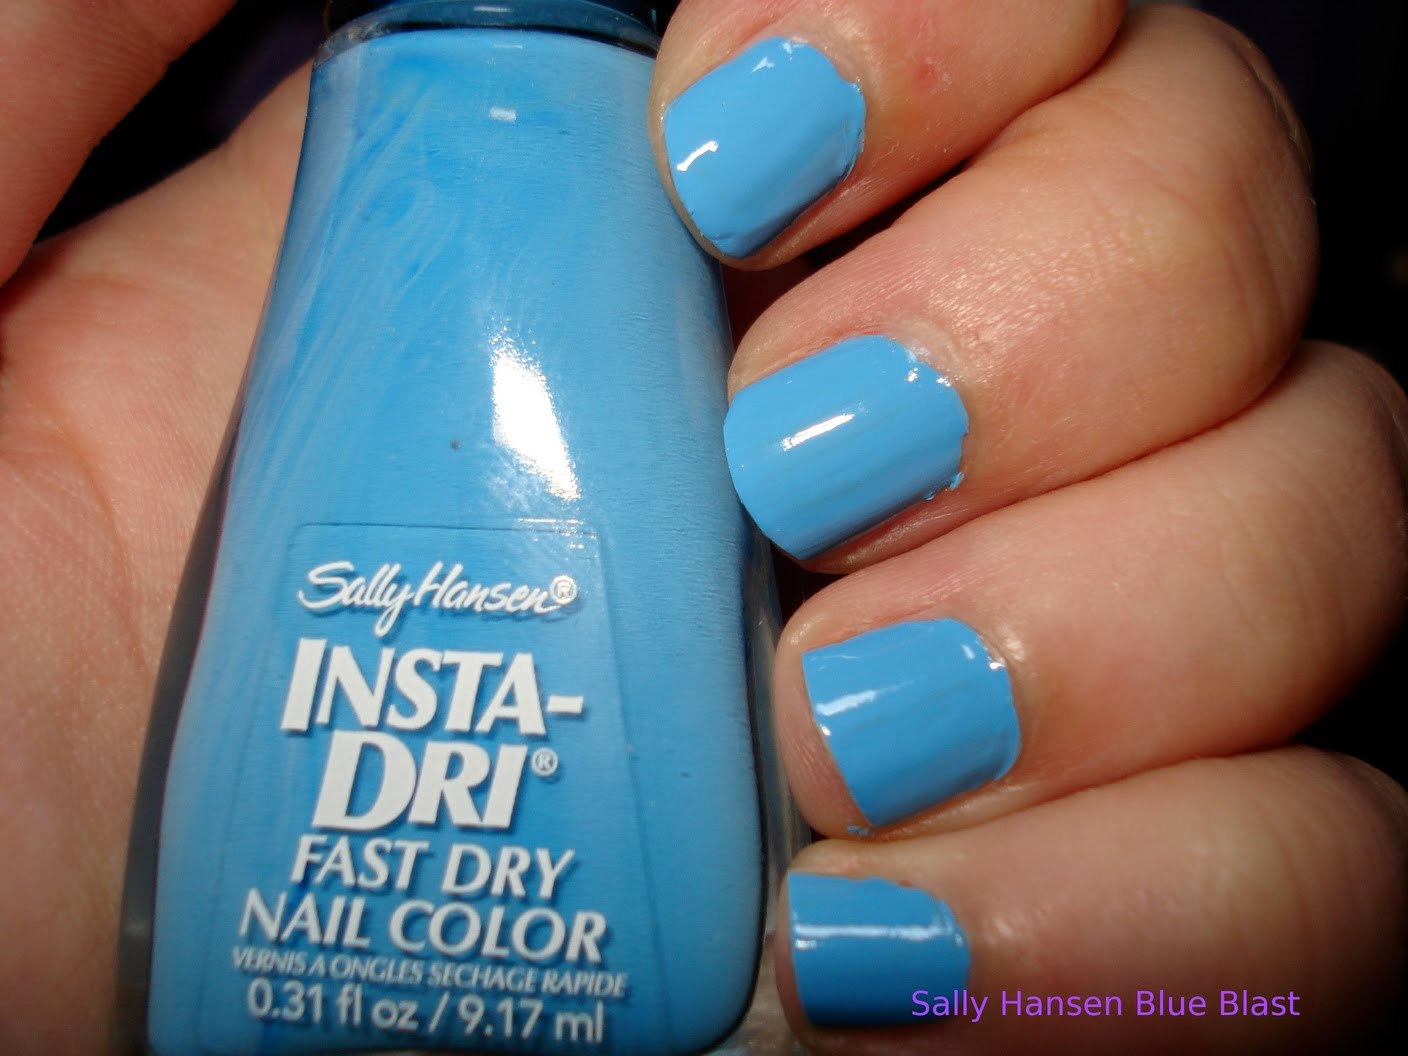 2. Get 20% off Sally Hansen Insta-Dri Nail Color with this printable coupon - wide 3